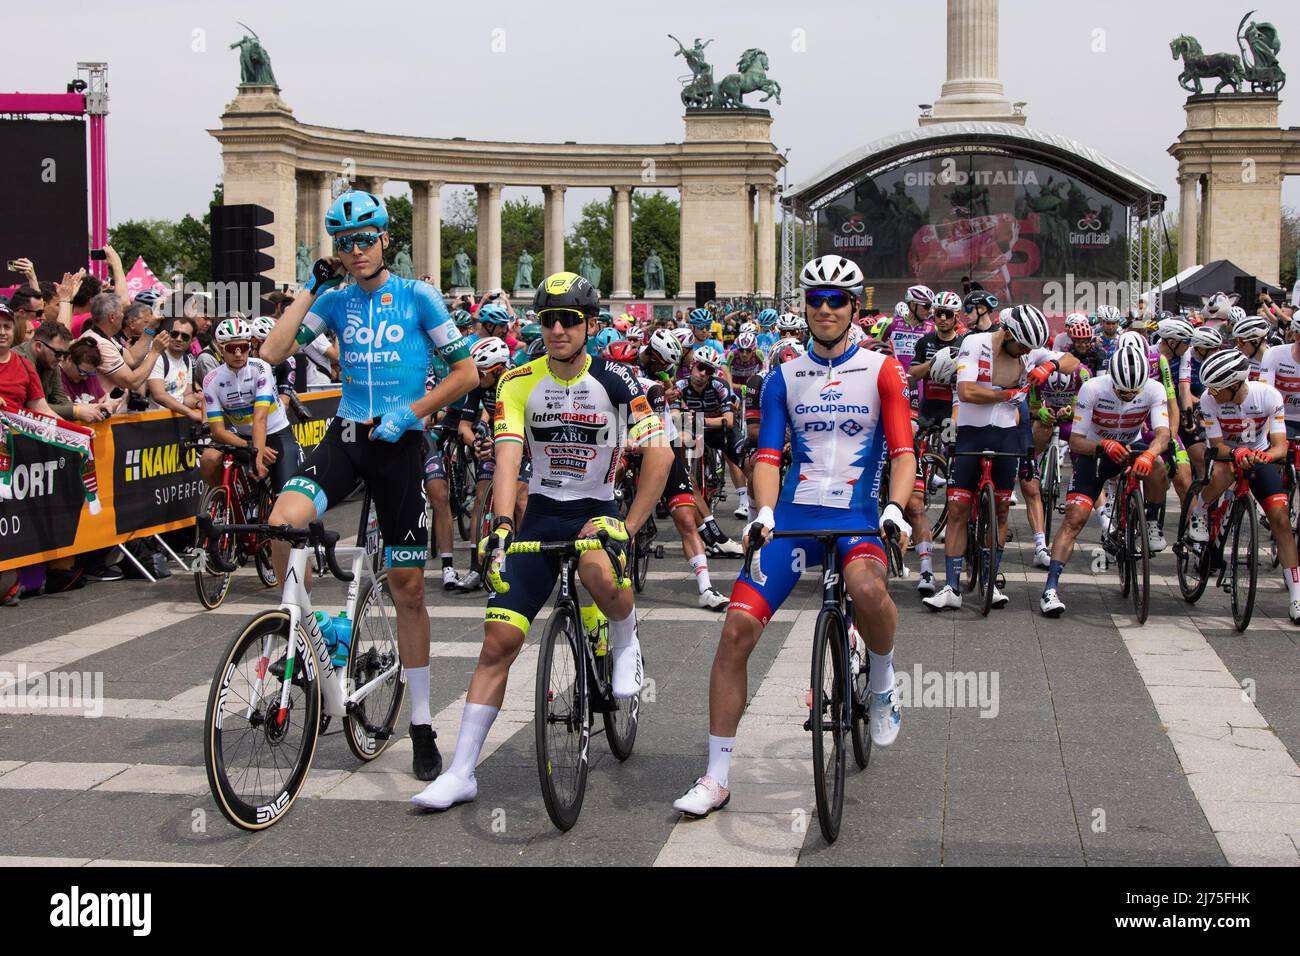 (220506) -- BUDAPEST, May 6, 2022 (Xinhua) -- Hungarian riders Erik Fetter of Eolo-Kometa Cycling Team, Barnabas Peak of Team Intermarche-Wanty-Gobert Materiaux, and Attila Valter of Team Groupama-FDJ (L to R) pose before the start of the Giro d'Italia 2022 bike race in Budapest, Hungary, May 6, 2022. The 2022 Giro d'Italia began on Friday in Hungary's capital Budapest, marking the beginning of the European cycling season. (Photo by Attila Volgyi/Xinhua) Stock Photo